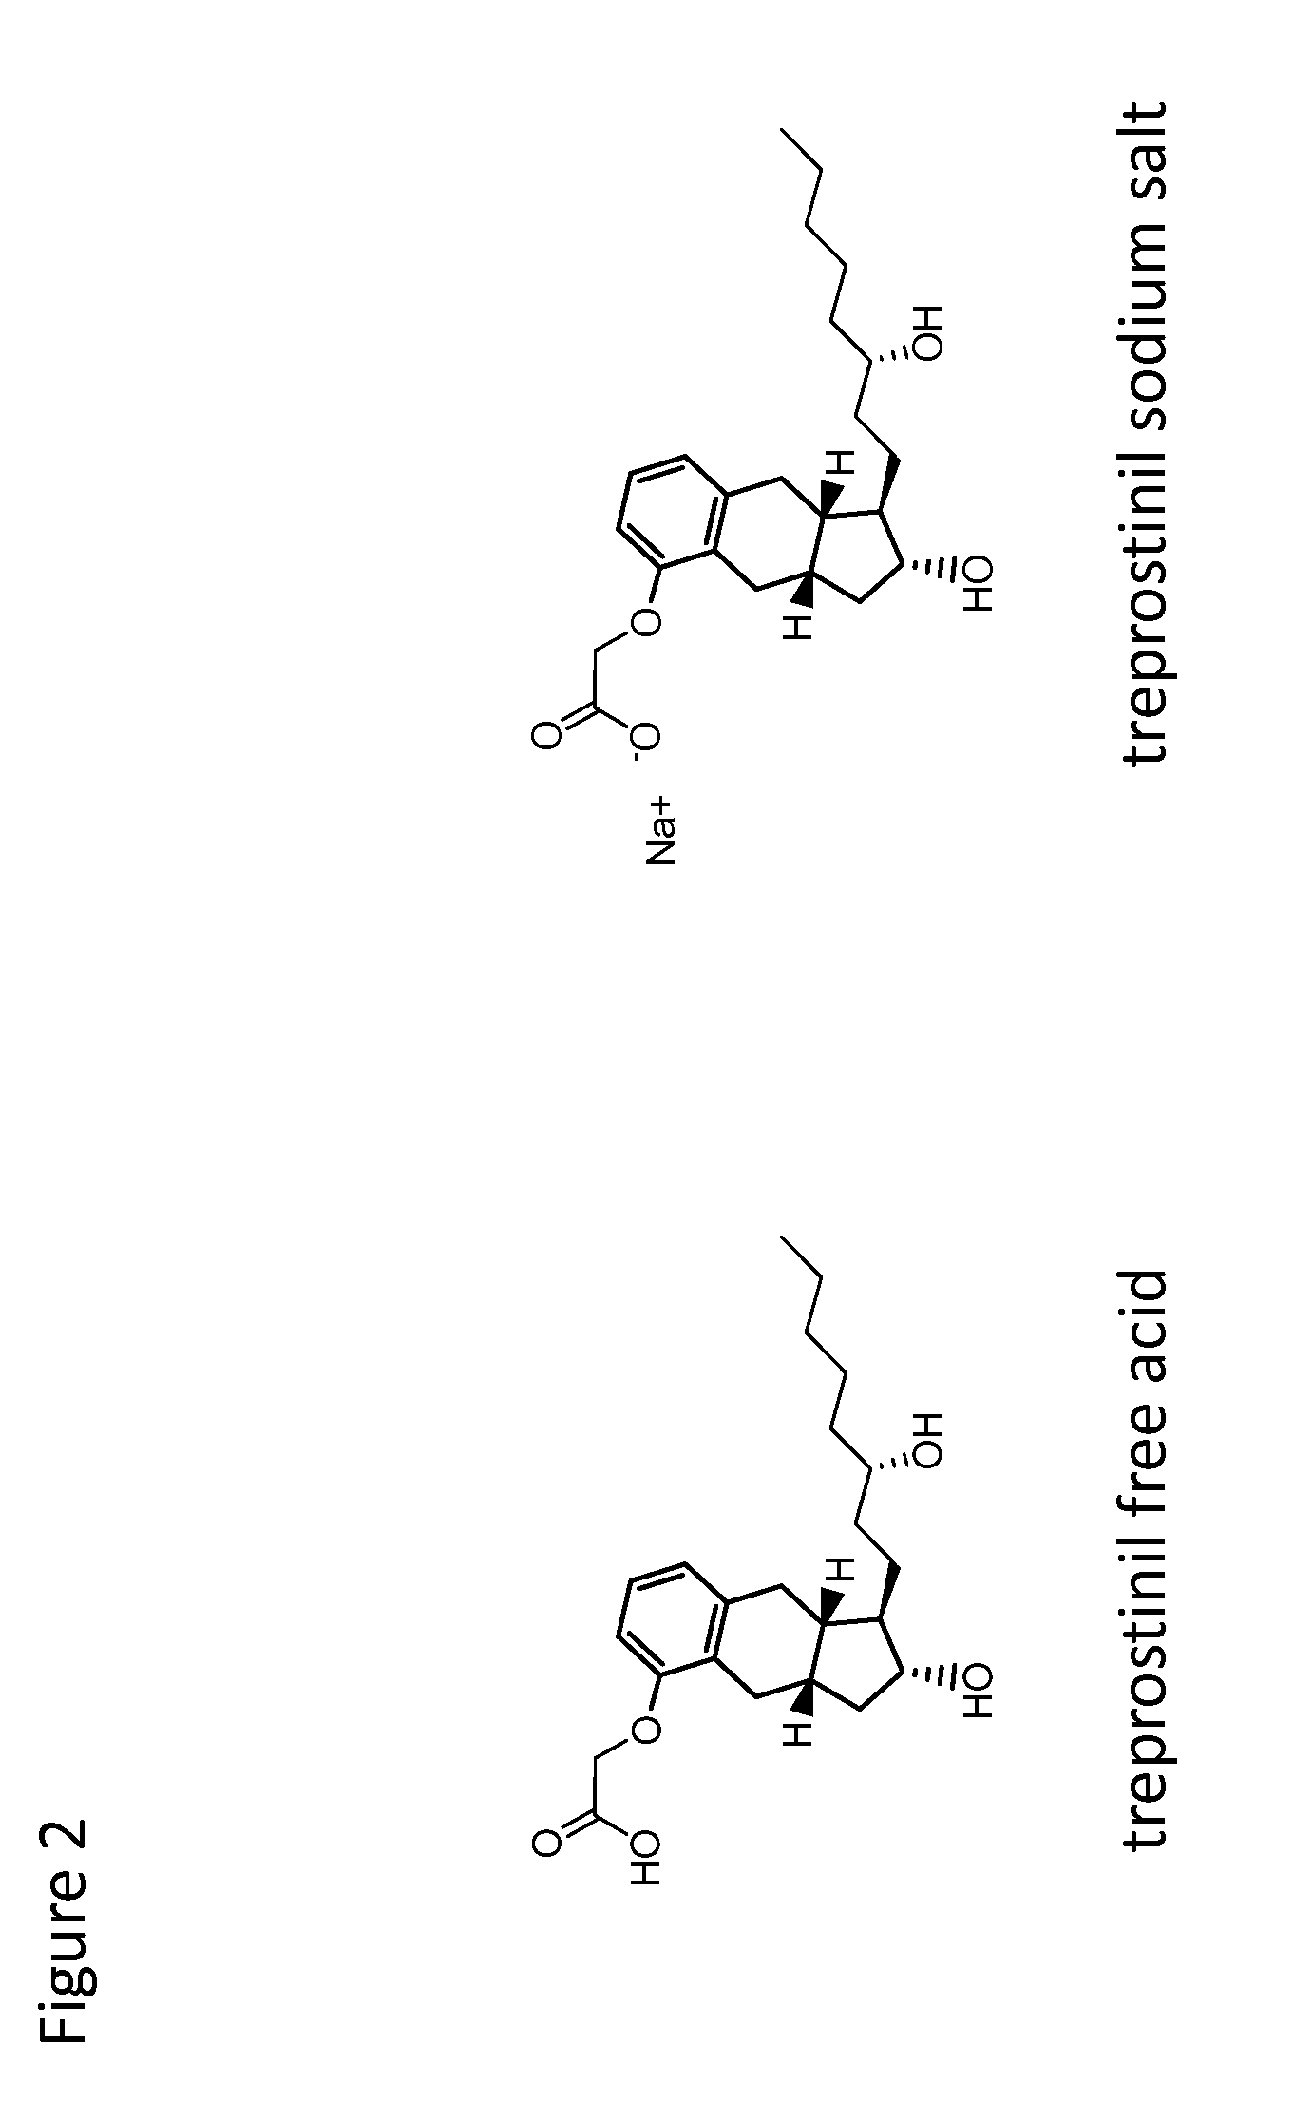 Prostacylin compositions and methods for using the same